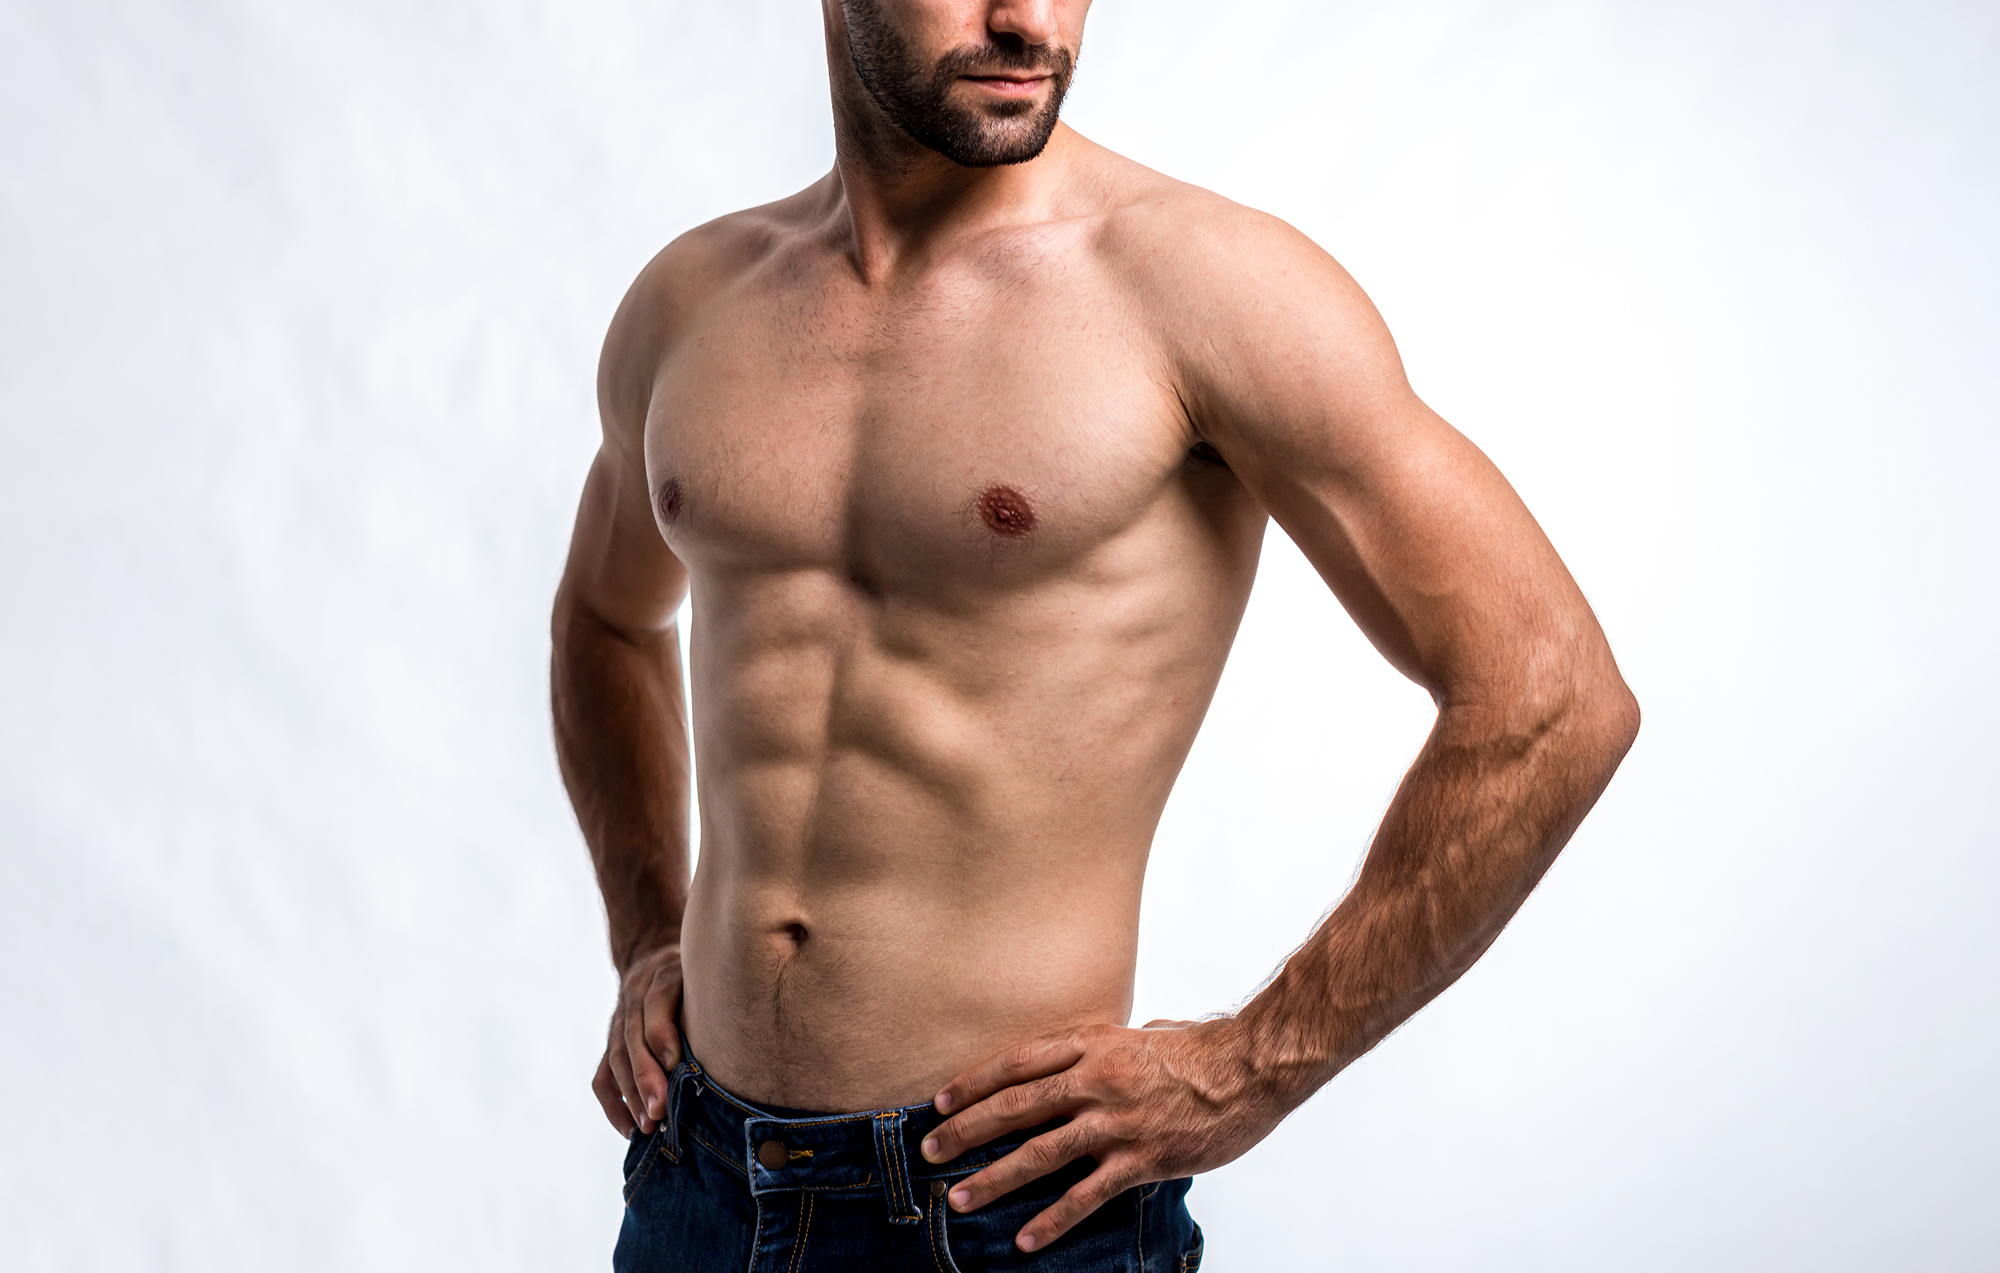 Confident athletic man after liposuction surgery.